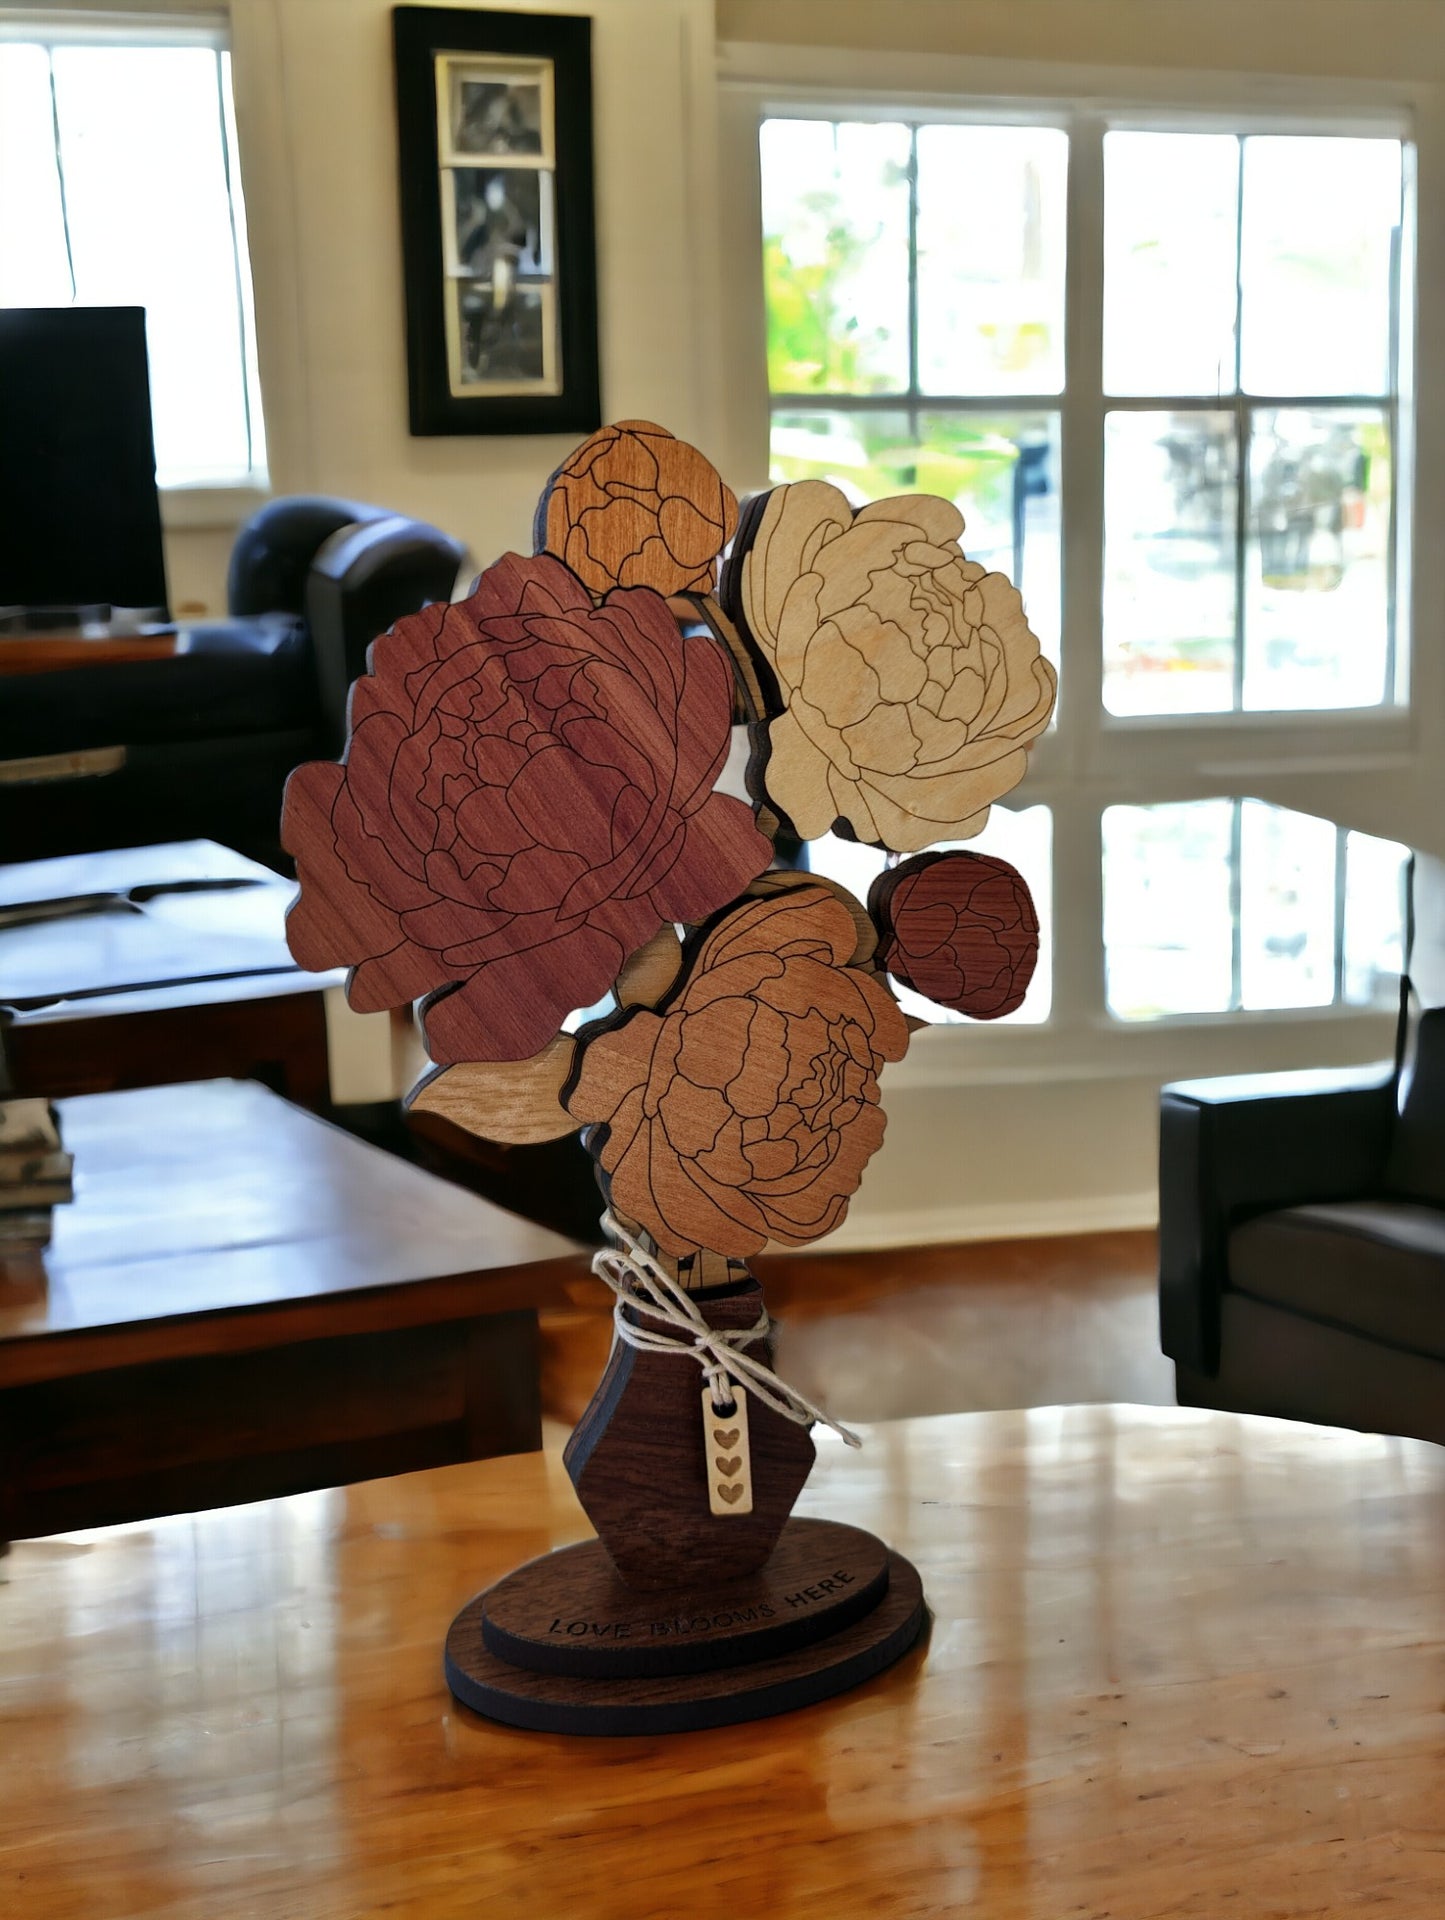 Everlasting Blooms: Handcrafted wooden peony floral bouquets for gift giving